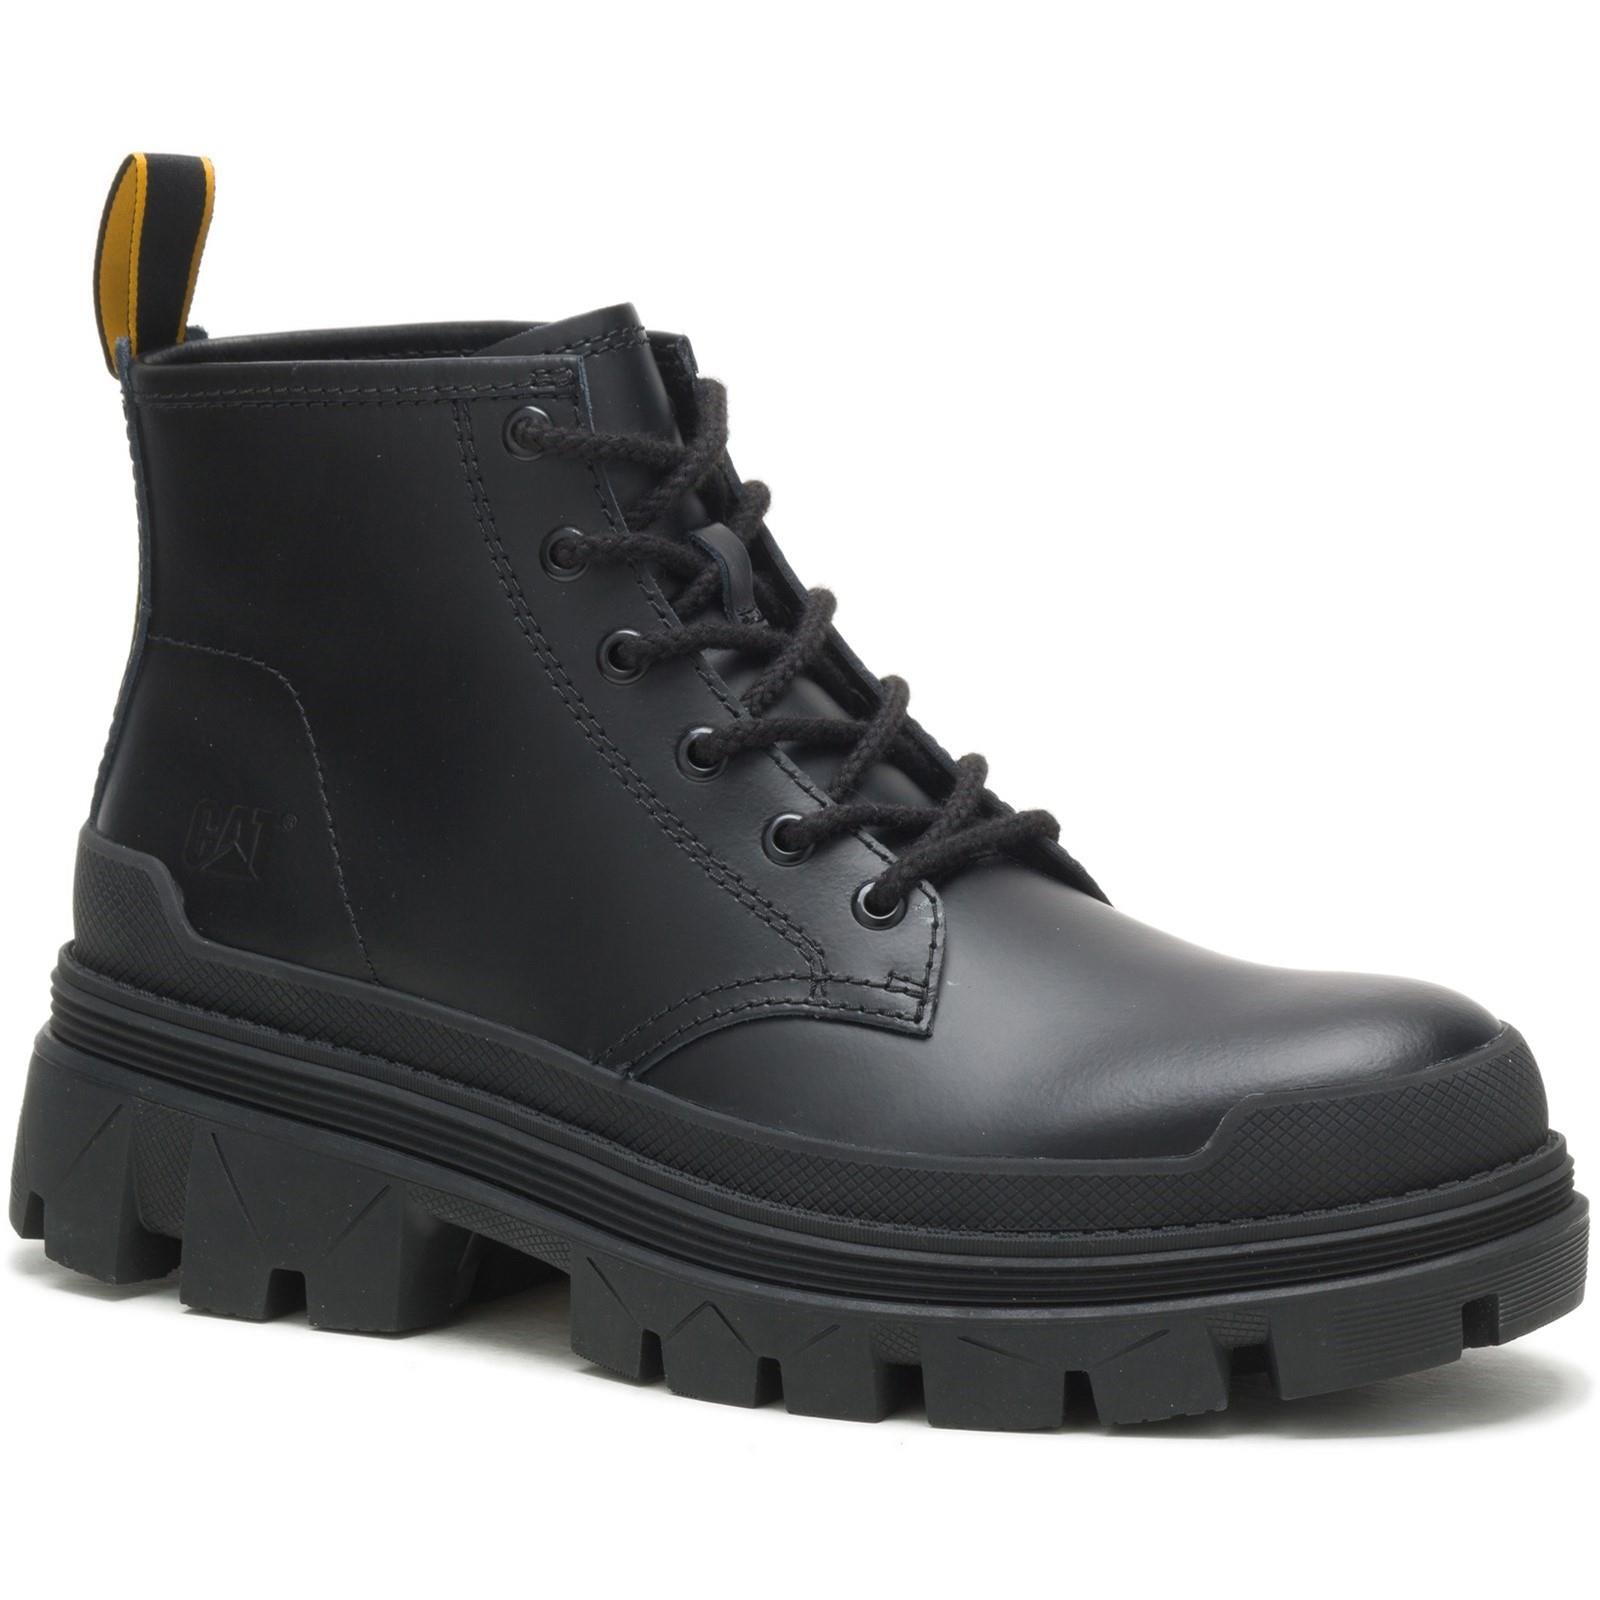 Caterpillar CAT Hardwear Mid black leather cushioned lace up boots